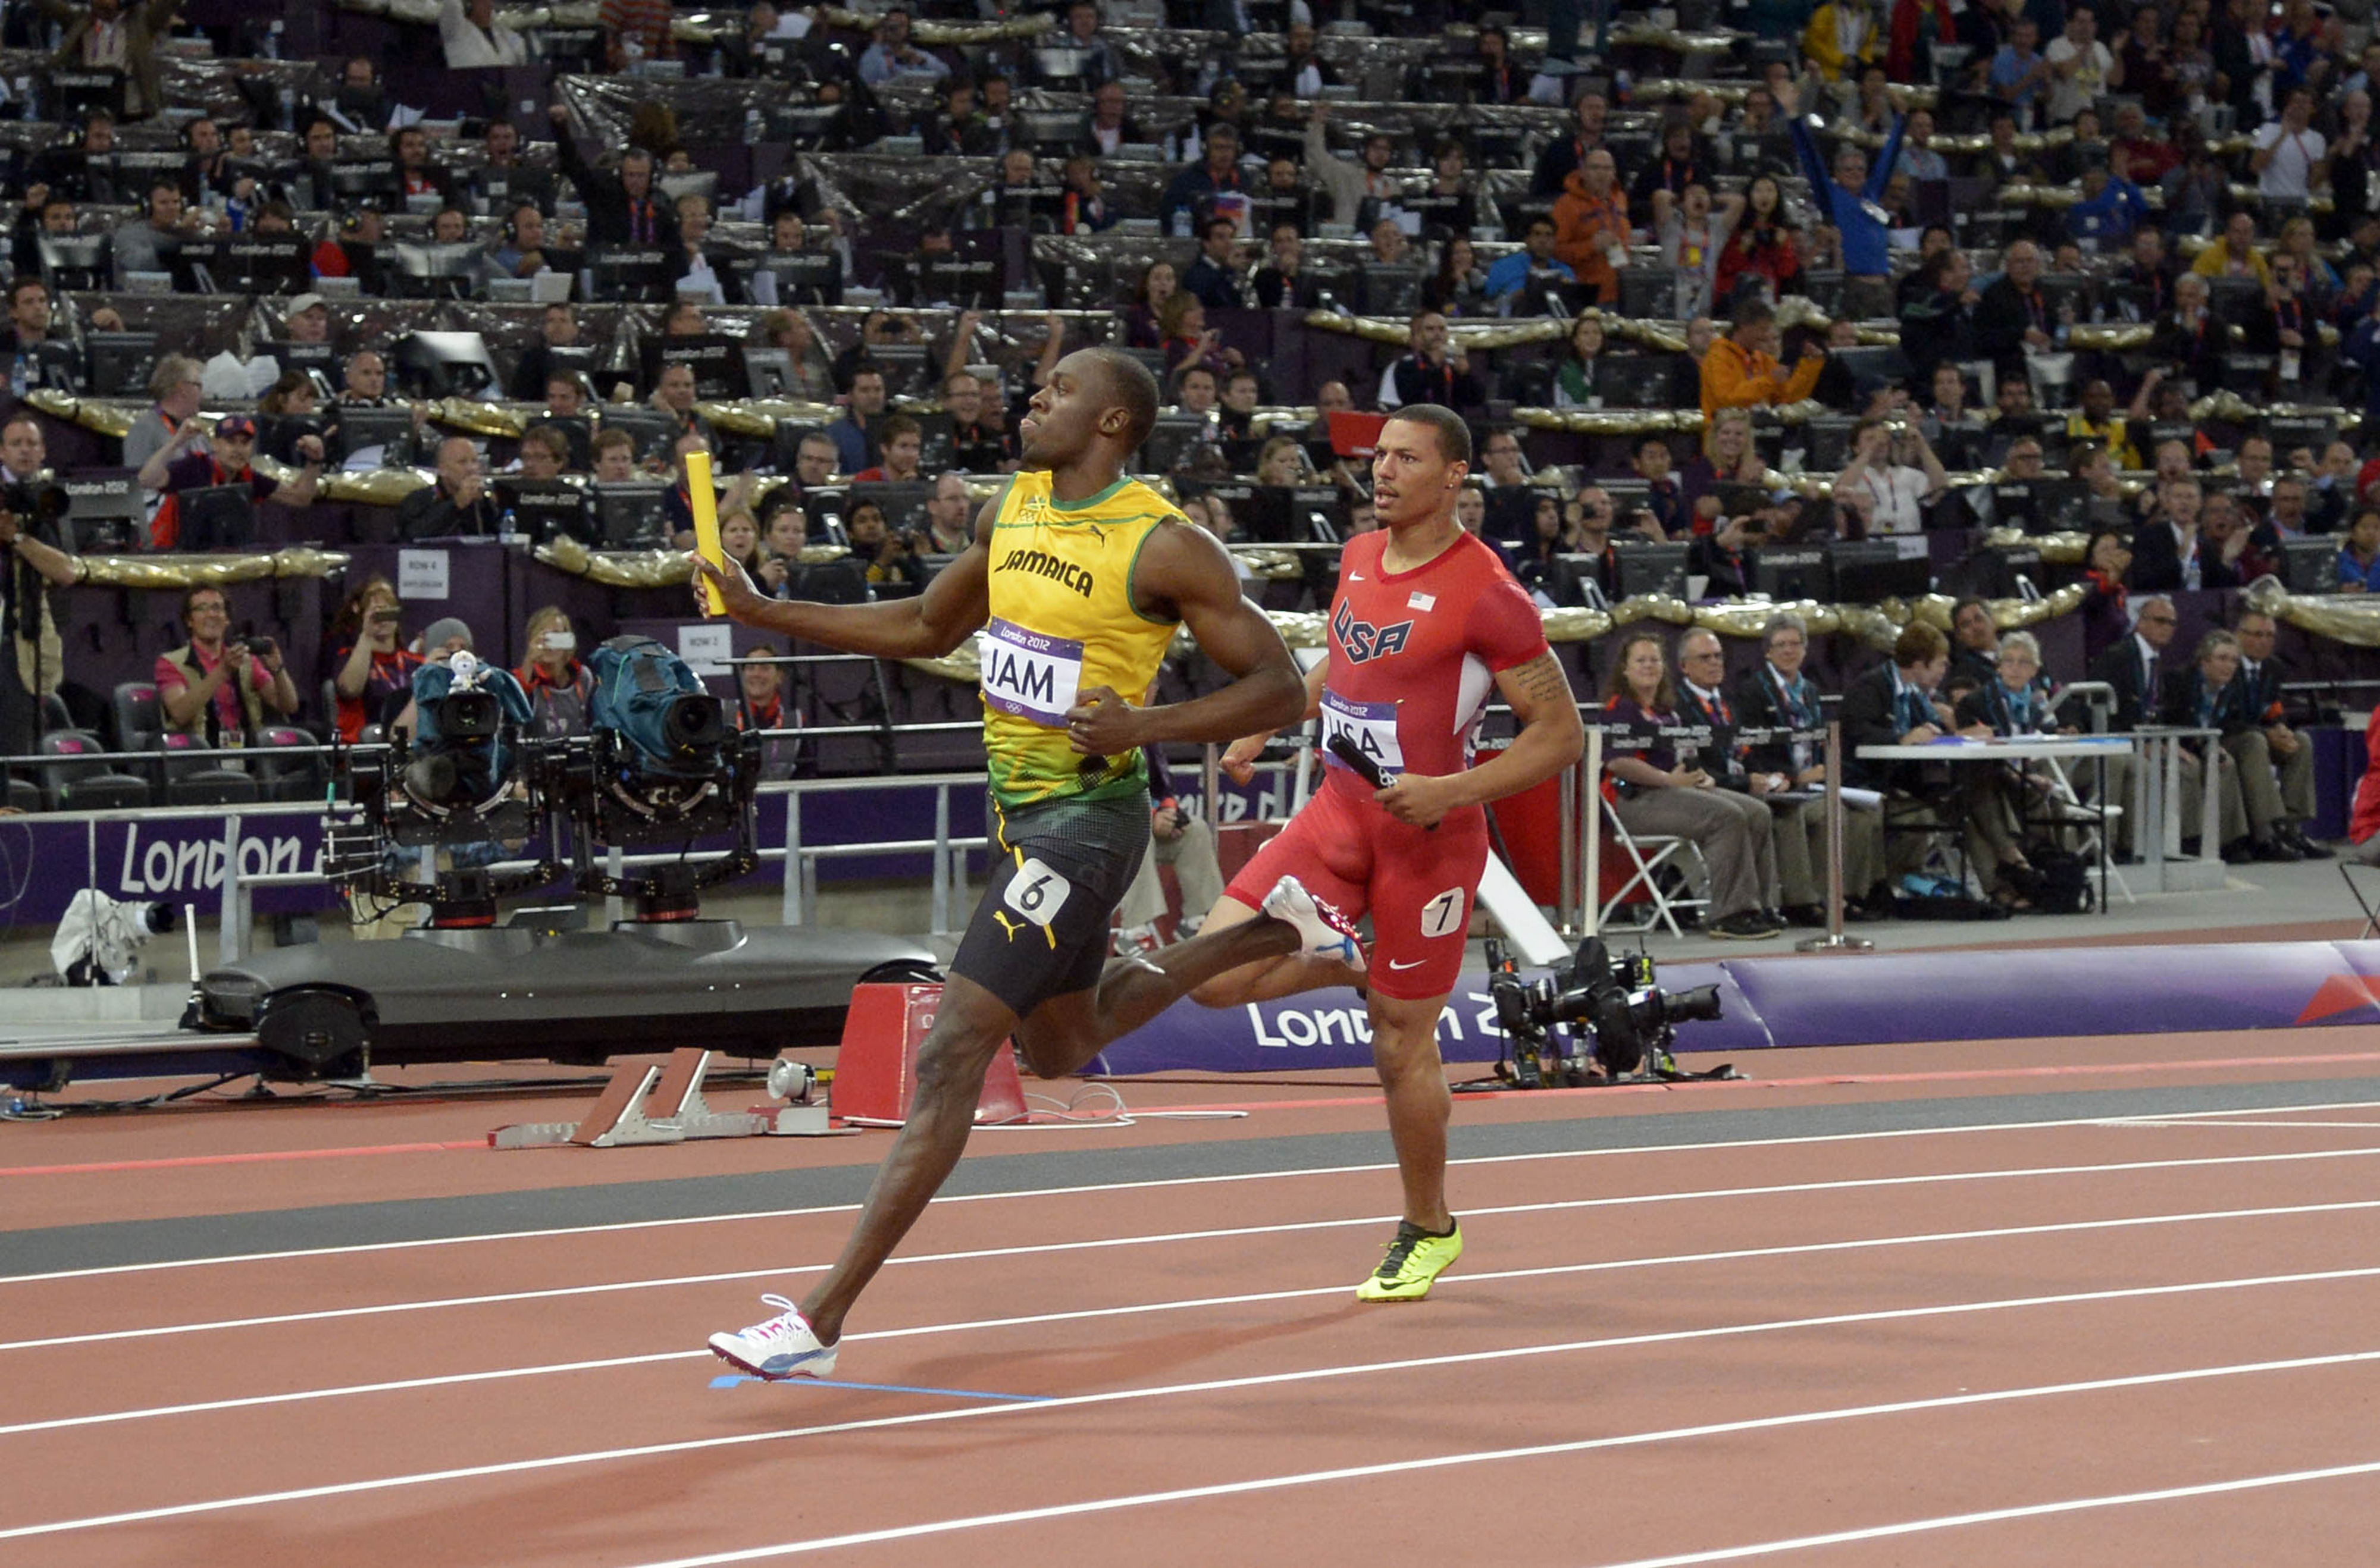 Aug 11, 2012; London, United Kingdom; Usain Bolt  reacts after running the anchor leg on the Jamaica 4 x 100m relay that set a world record of 36.84 in the London 2012 Olympic Games at Olympic Stadium.Mandatory Credit: Kirby Lee-USA TODAY Sports